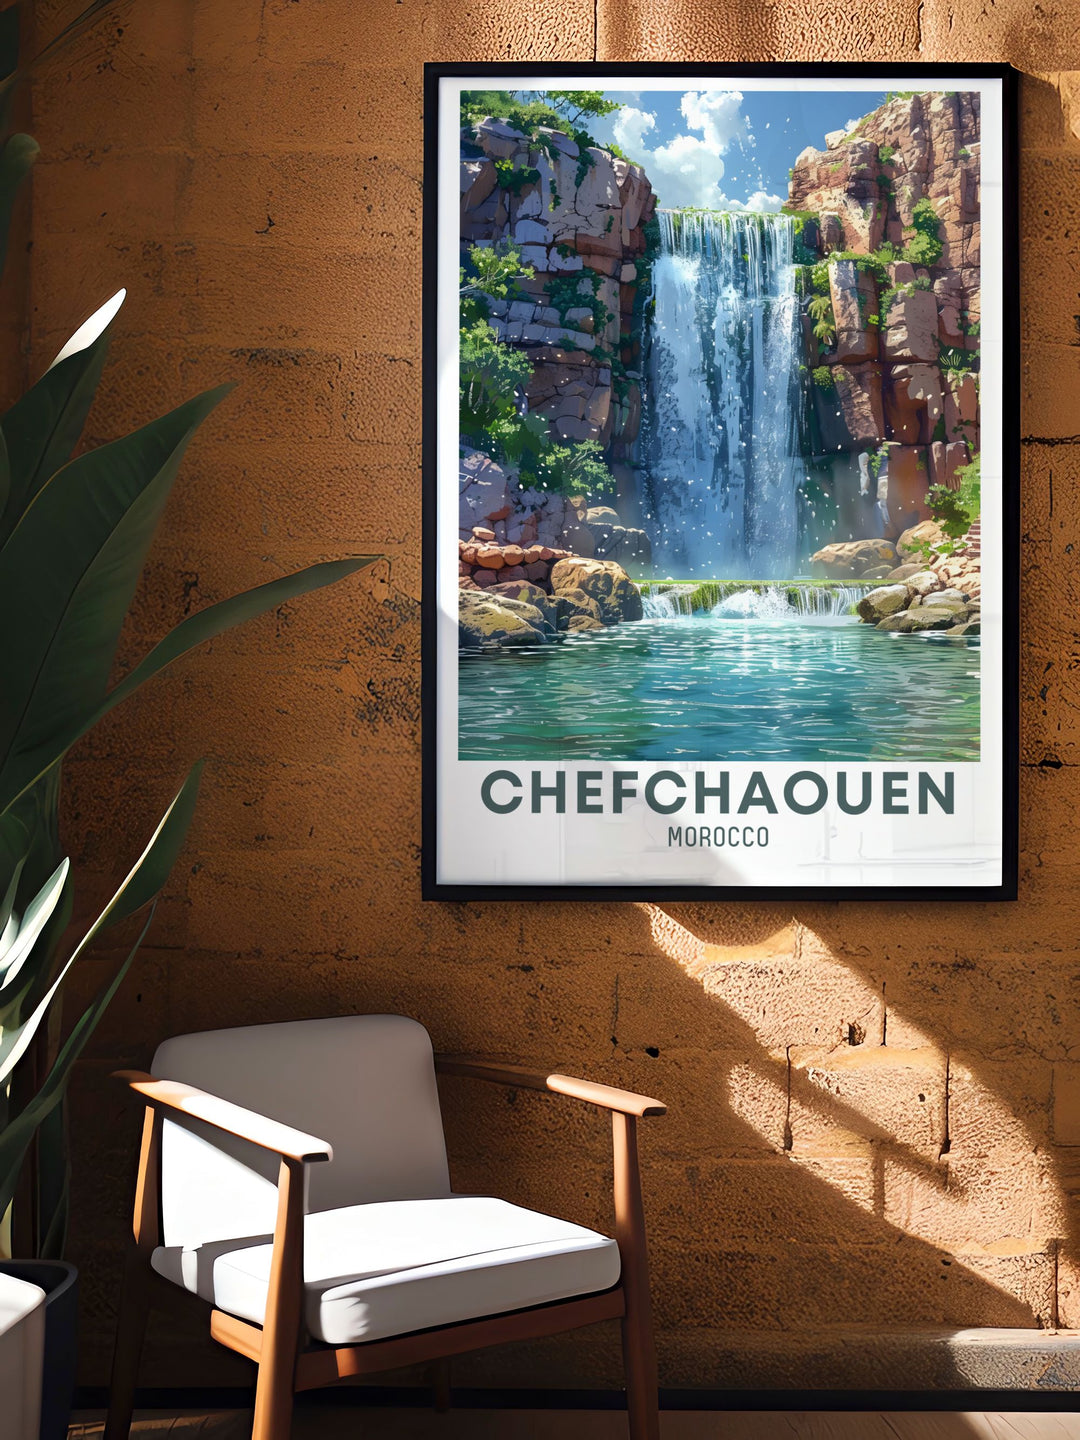 Capture the essence of Chefchaouen with this stunning wall art print, featuring the towns blue washed streets and vibrant atmosphere. The picturesque Blue City of Chefchaouen is beautifully illustrated in this travel poster, ideal for enhancing any room with Moroccan charm.